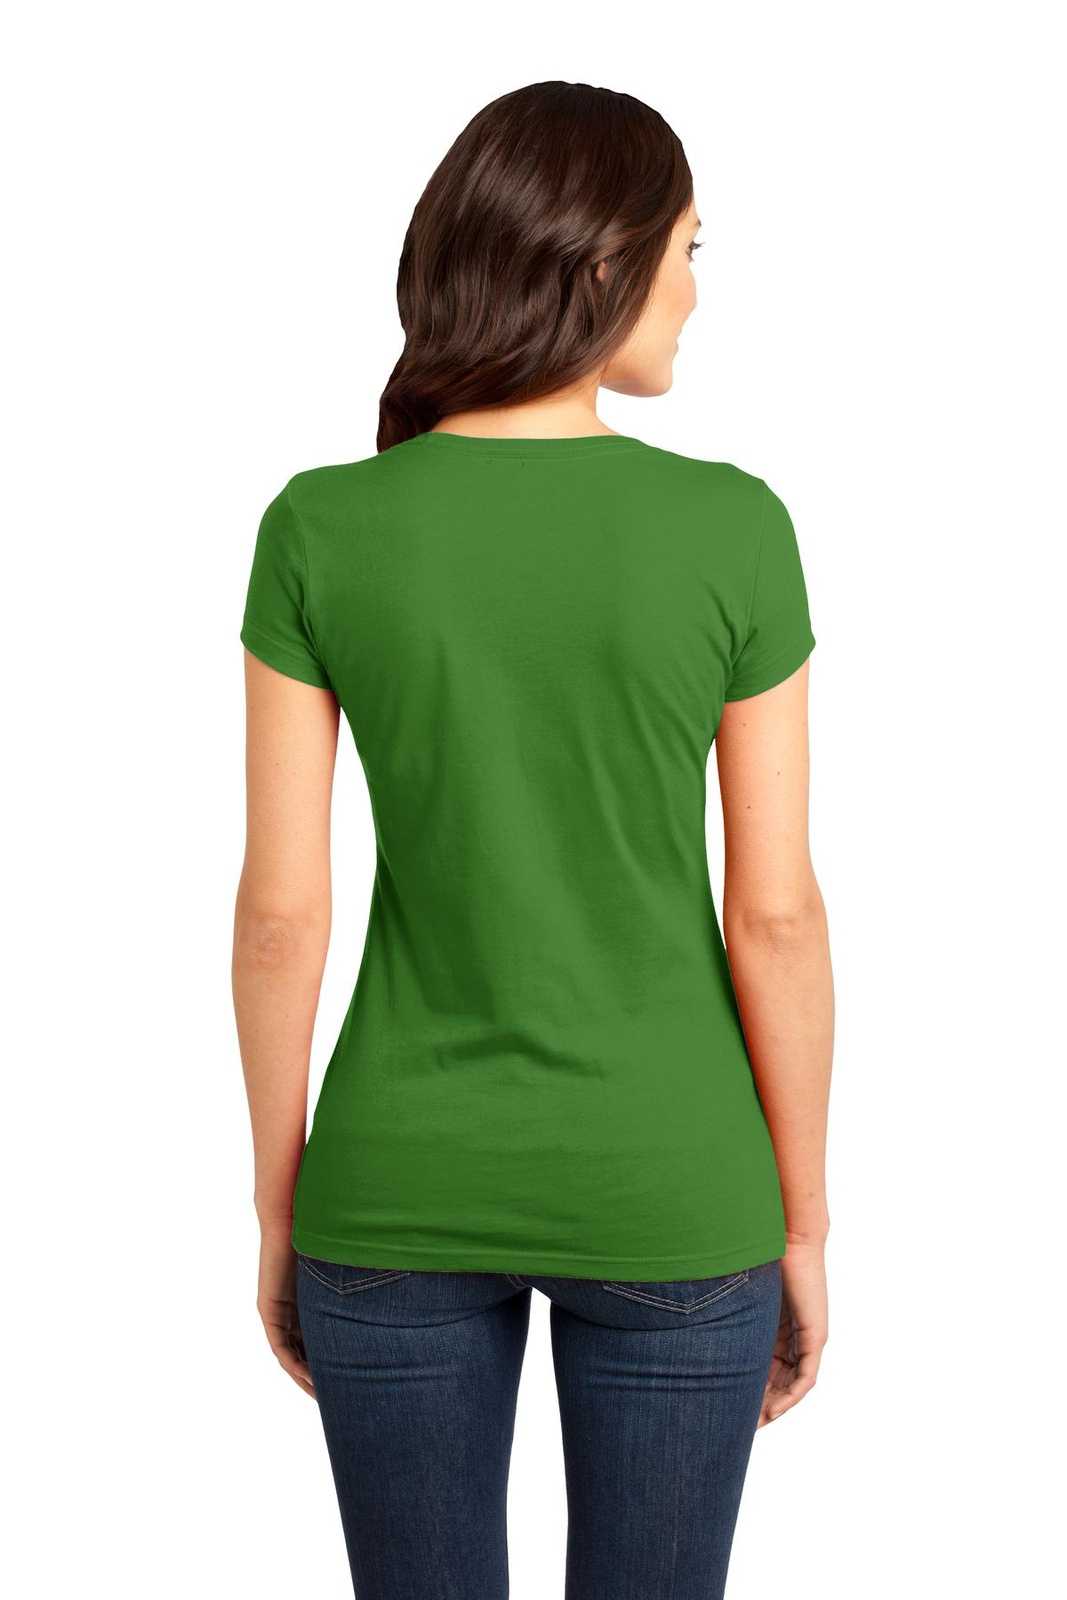 District DT6001 Women's Fitted Very Important Tee - Kiwi Green - HIT a Double - 1